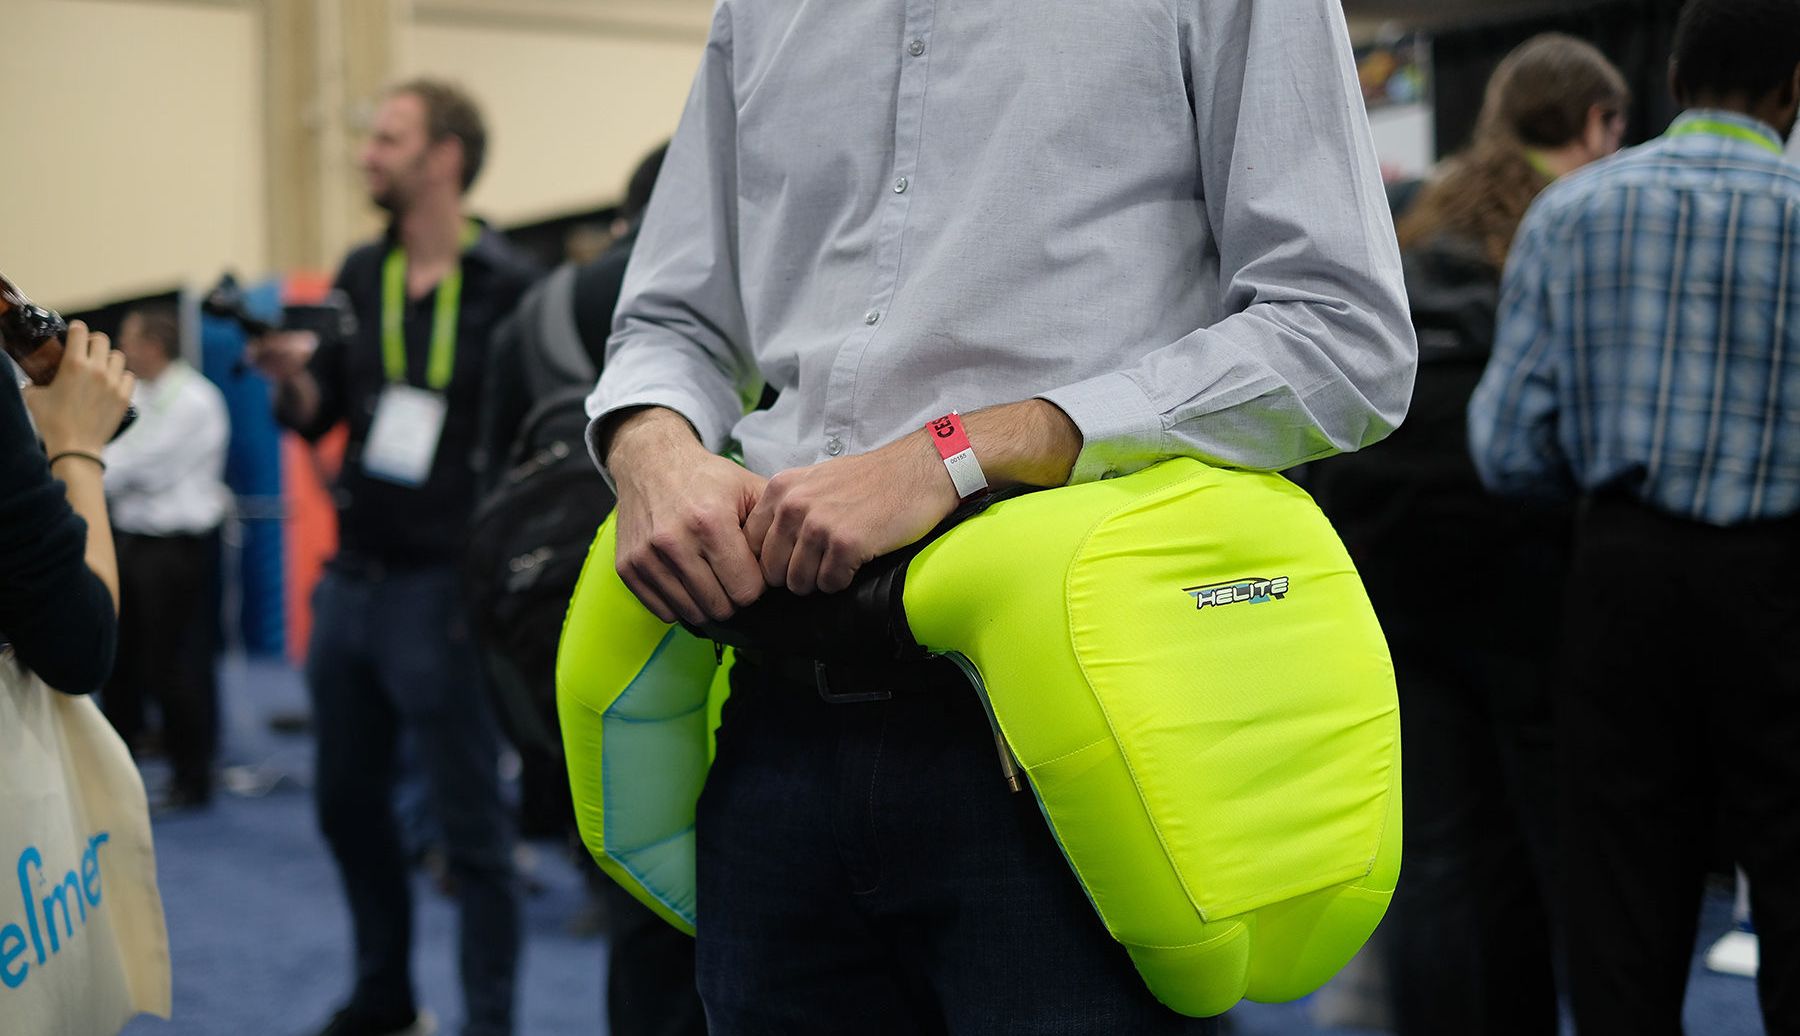 #CES 2018 | Company Helite has developed a airbag for people